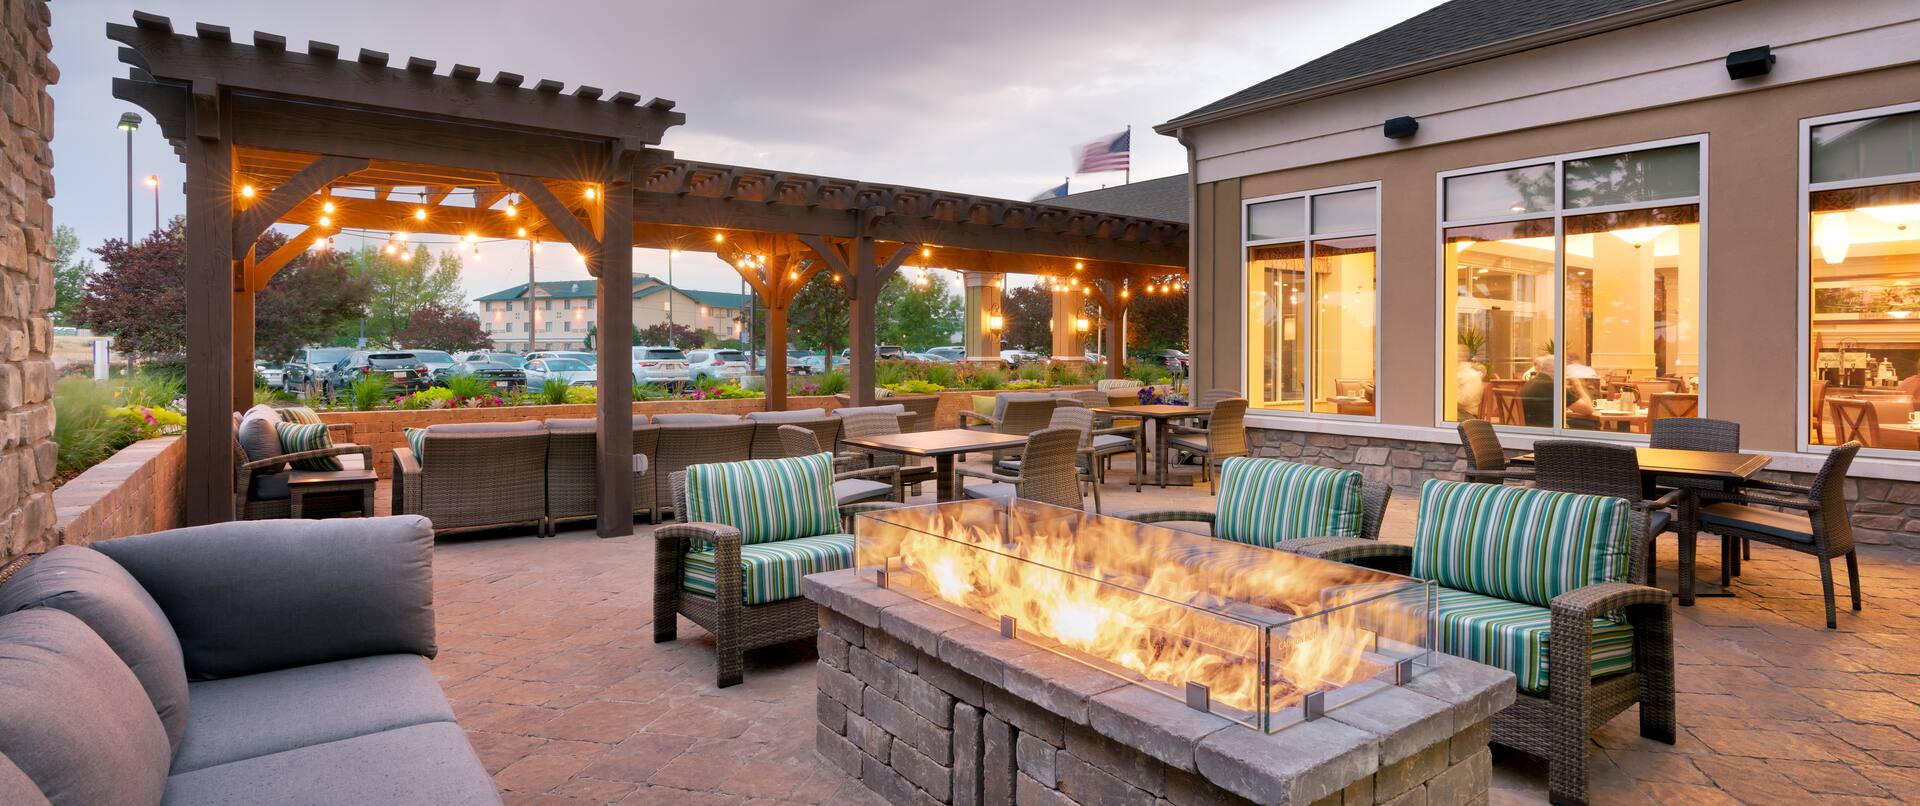 Exterior Patio with Firepit